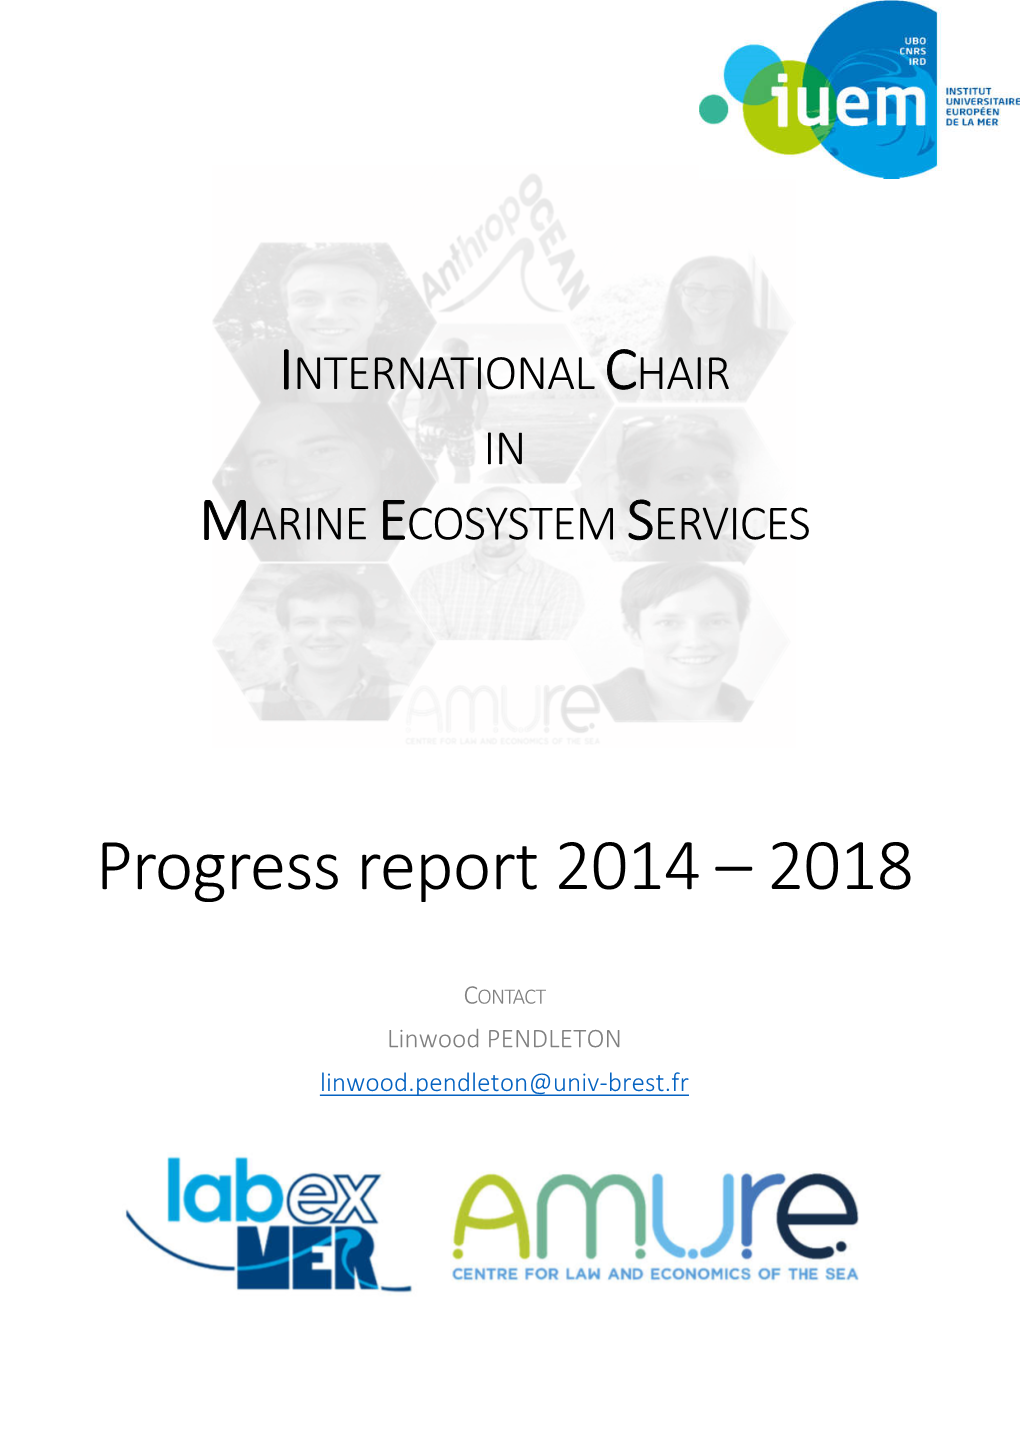 Progress Report (2014-2018) of the IC-MES